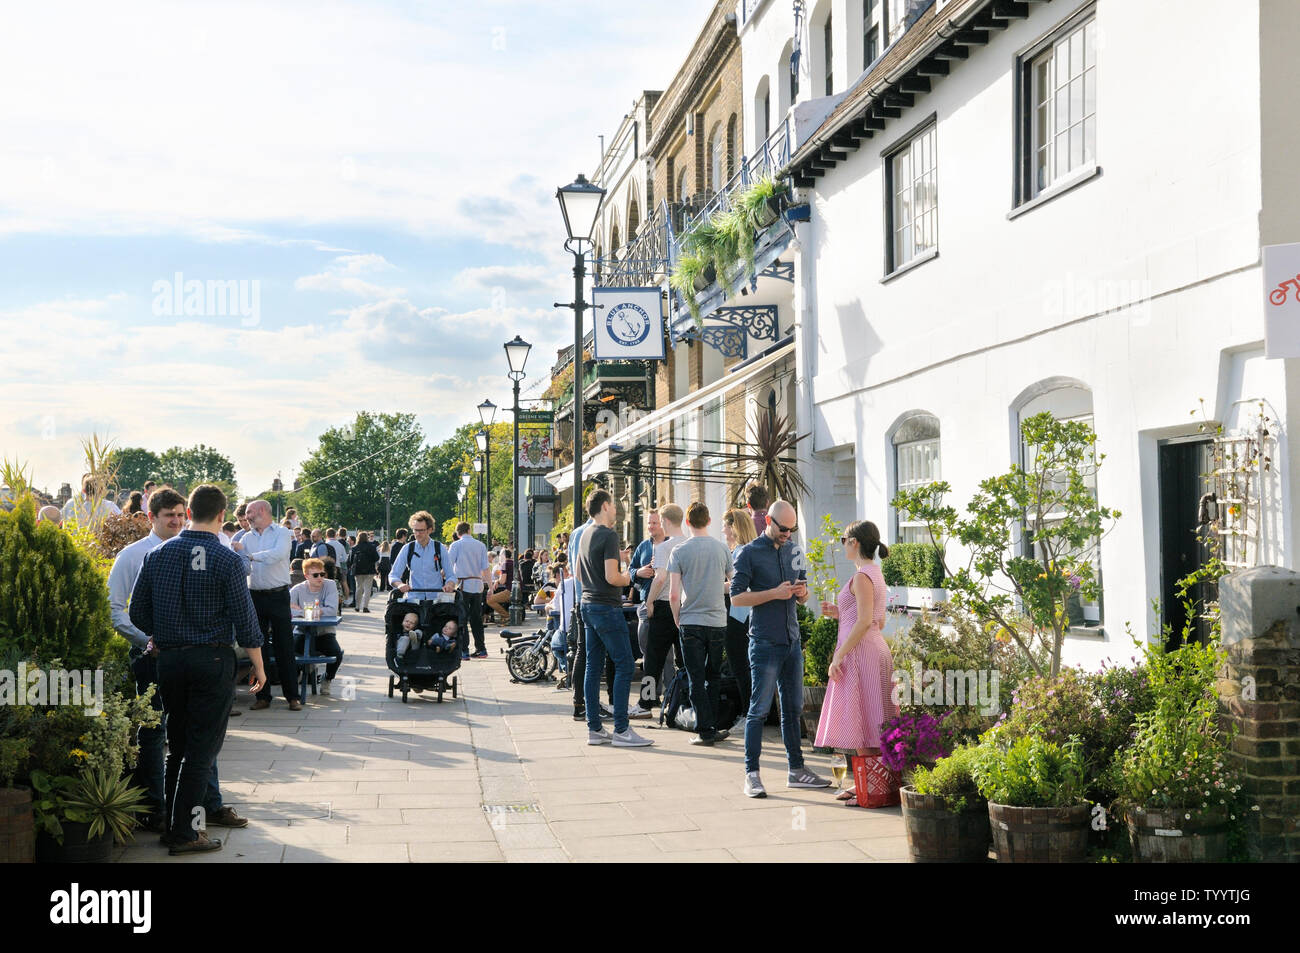 People enjoying drinks in the sunshine outside The Blue Anchor and The Rutland Arms riverside pubs on Lower Mall, Hammersmith, London W6, England, UK Stock Photo